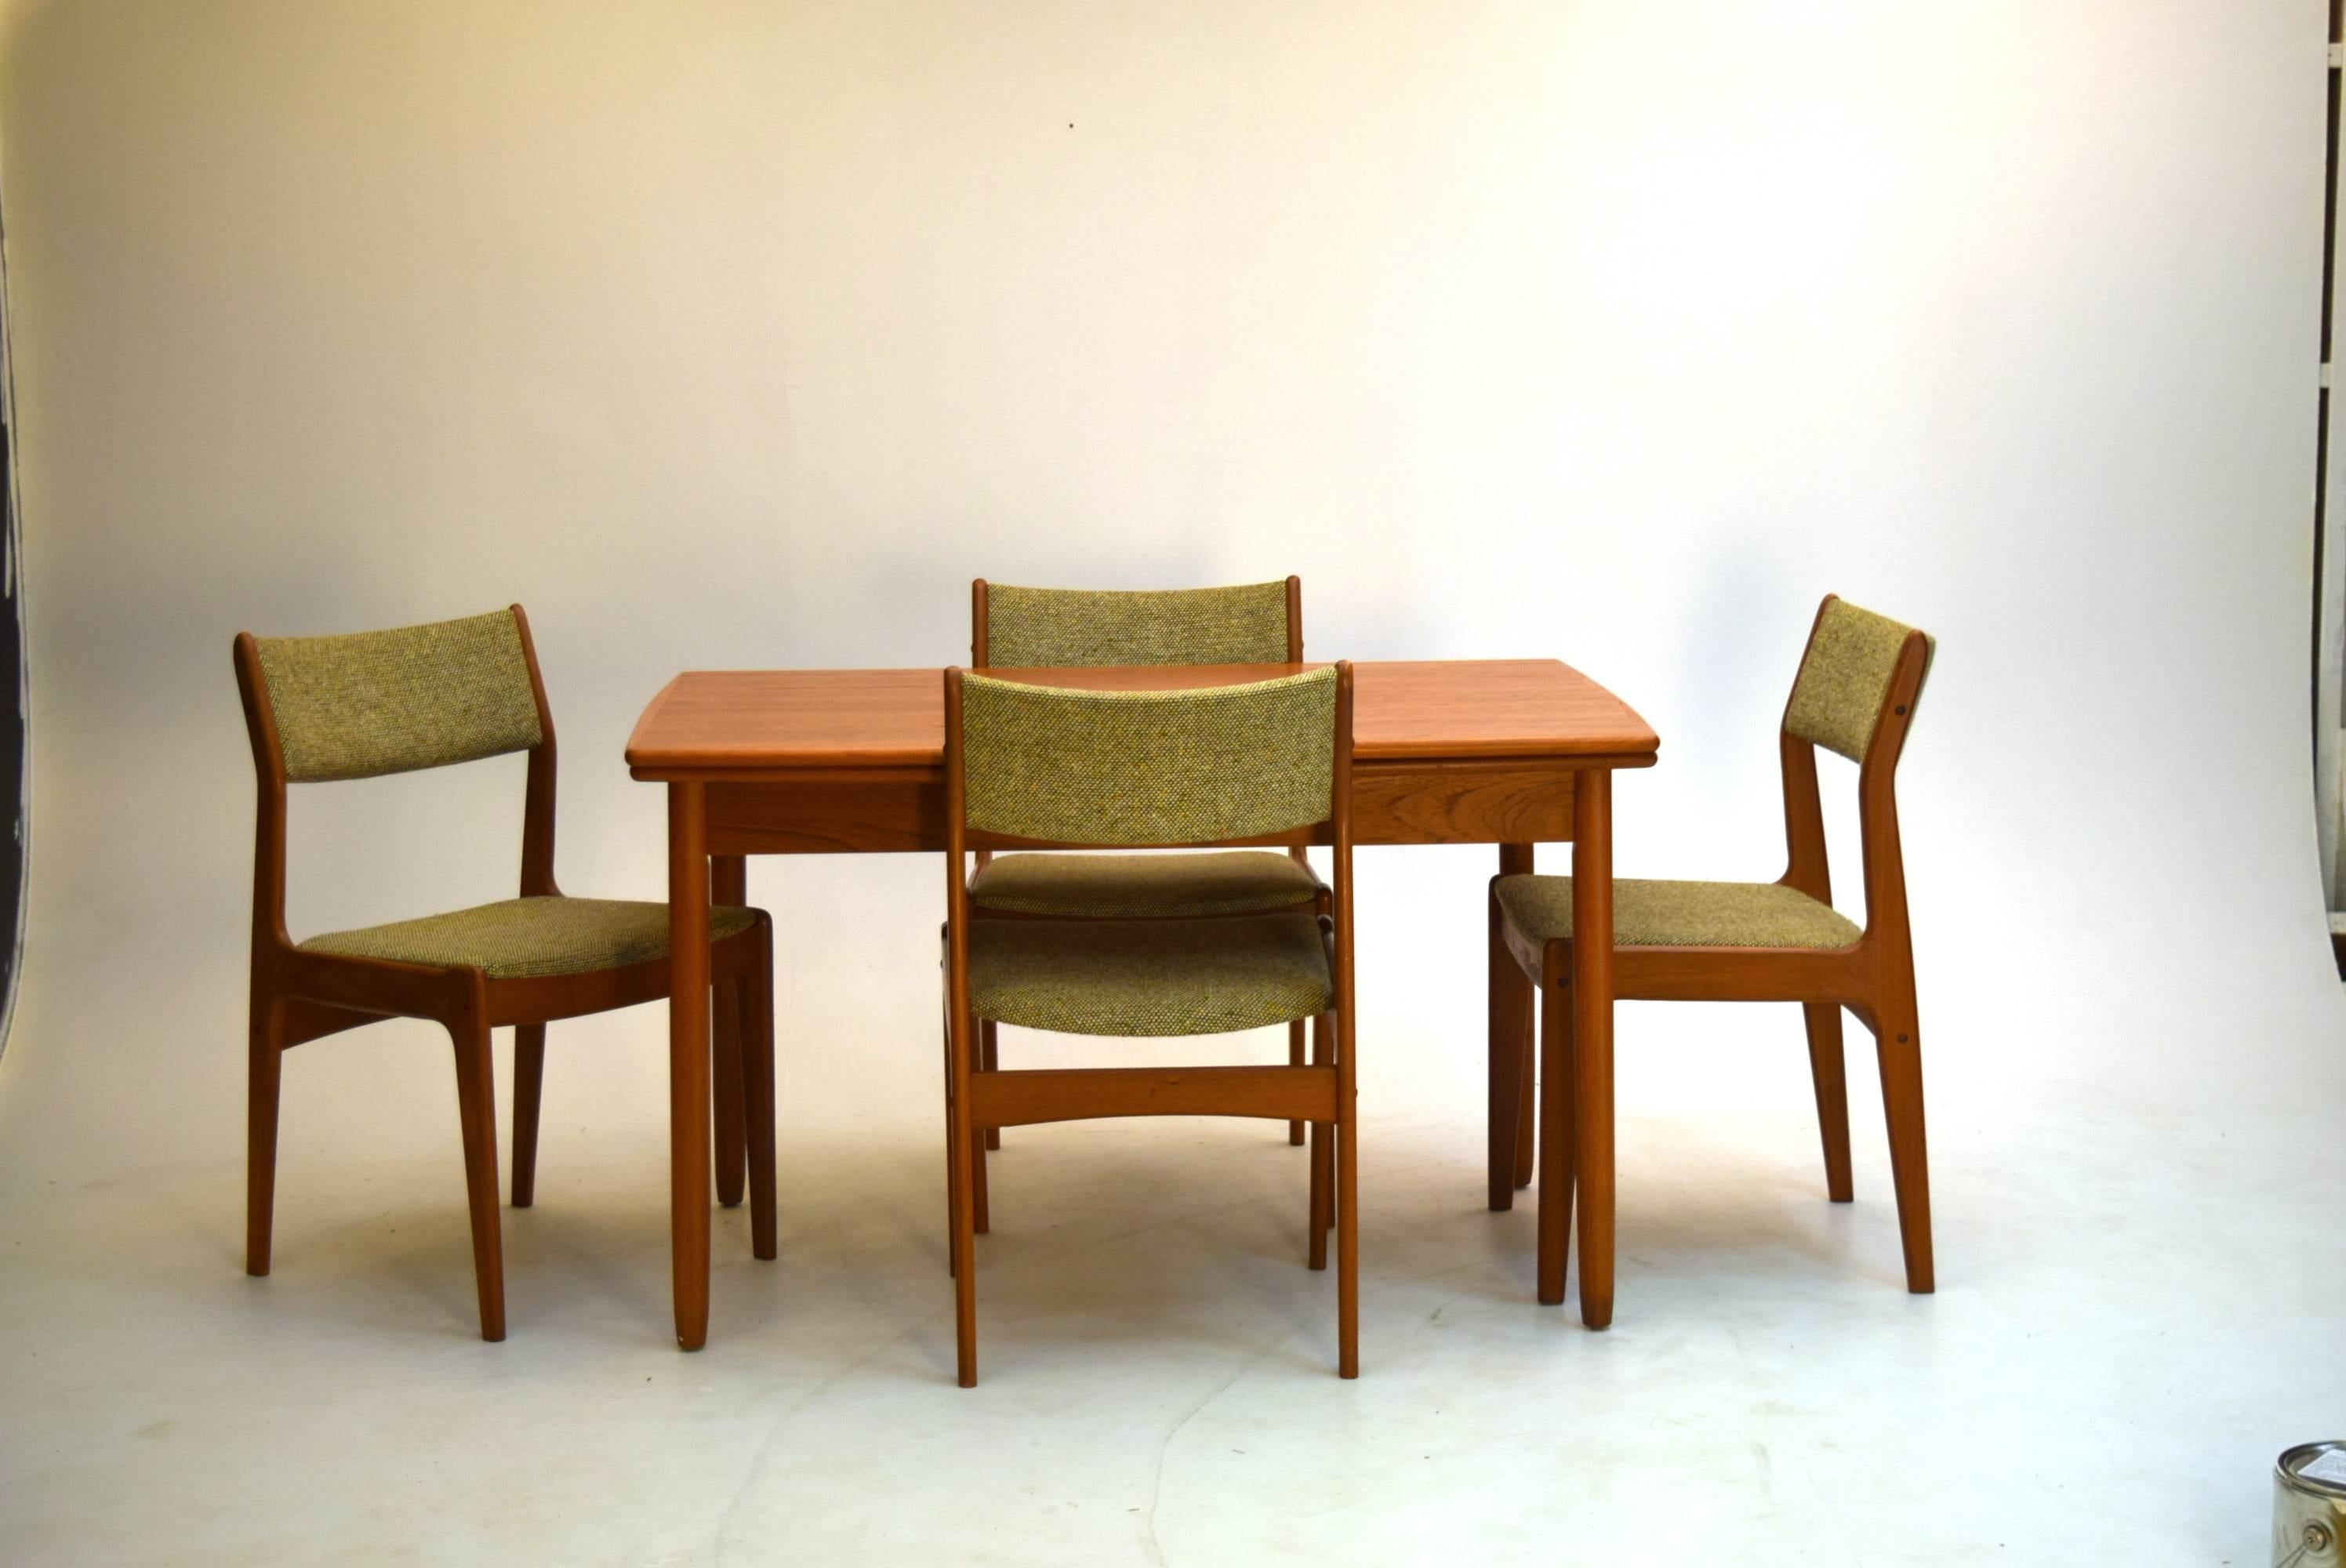 Produced between 1960-1970, this model by Scandinavia woodworks features superior teak over models of the period and while seats six with six side chairs provided, an additional captains armchair is provided so you have an extra chair - 7 in